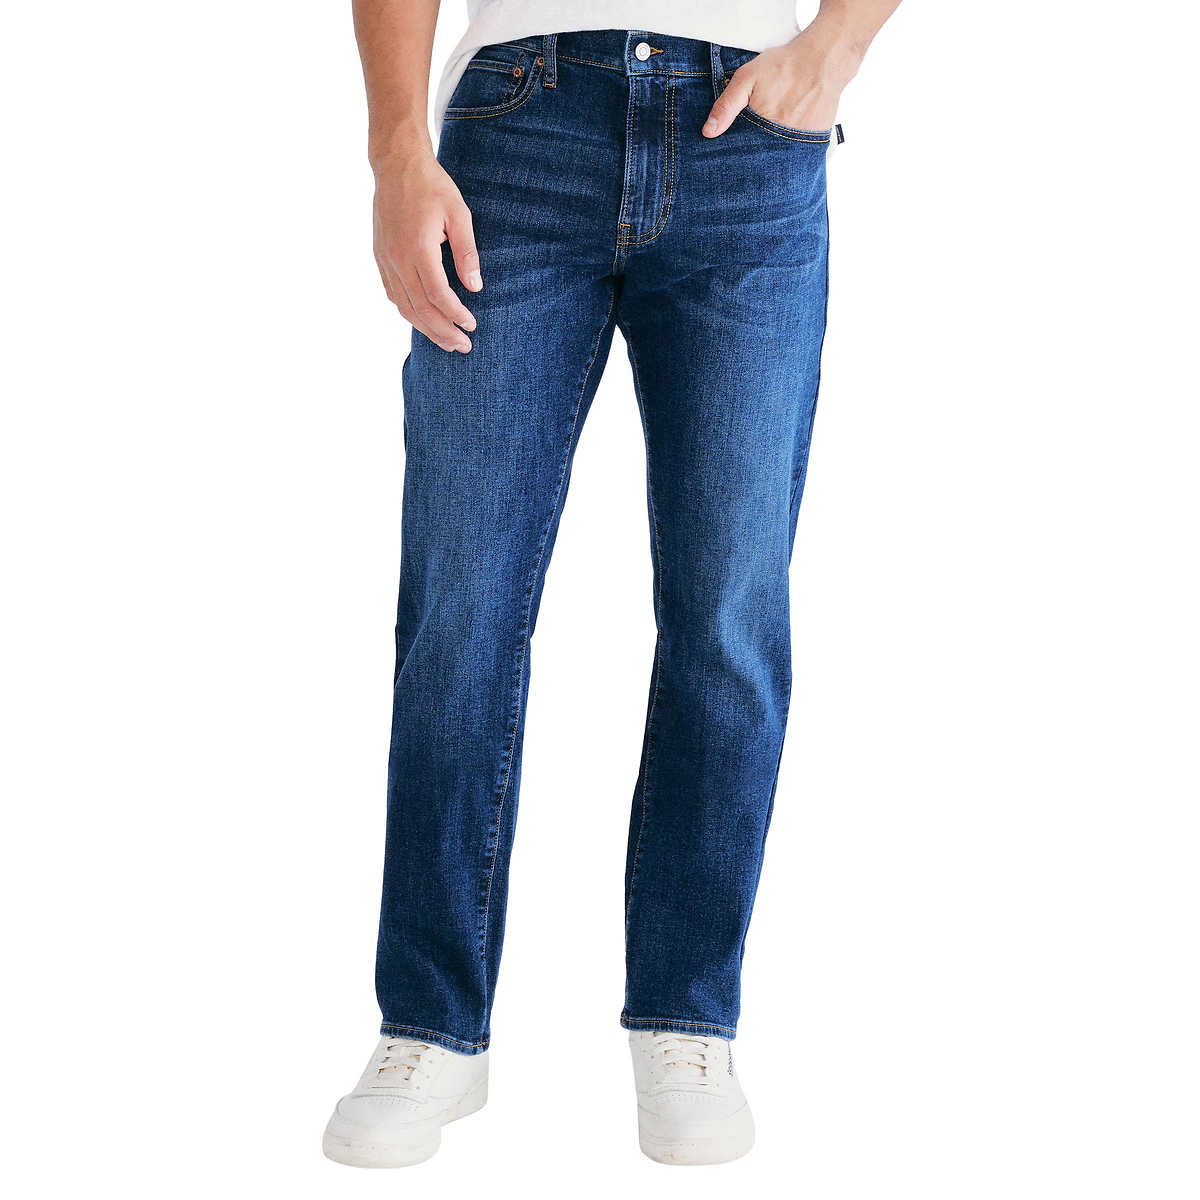 Costco Members: Lucky Brand Men’s 410 Athletic Fit Jeans (Blue or Black)